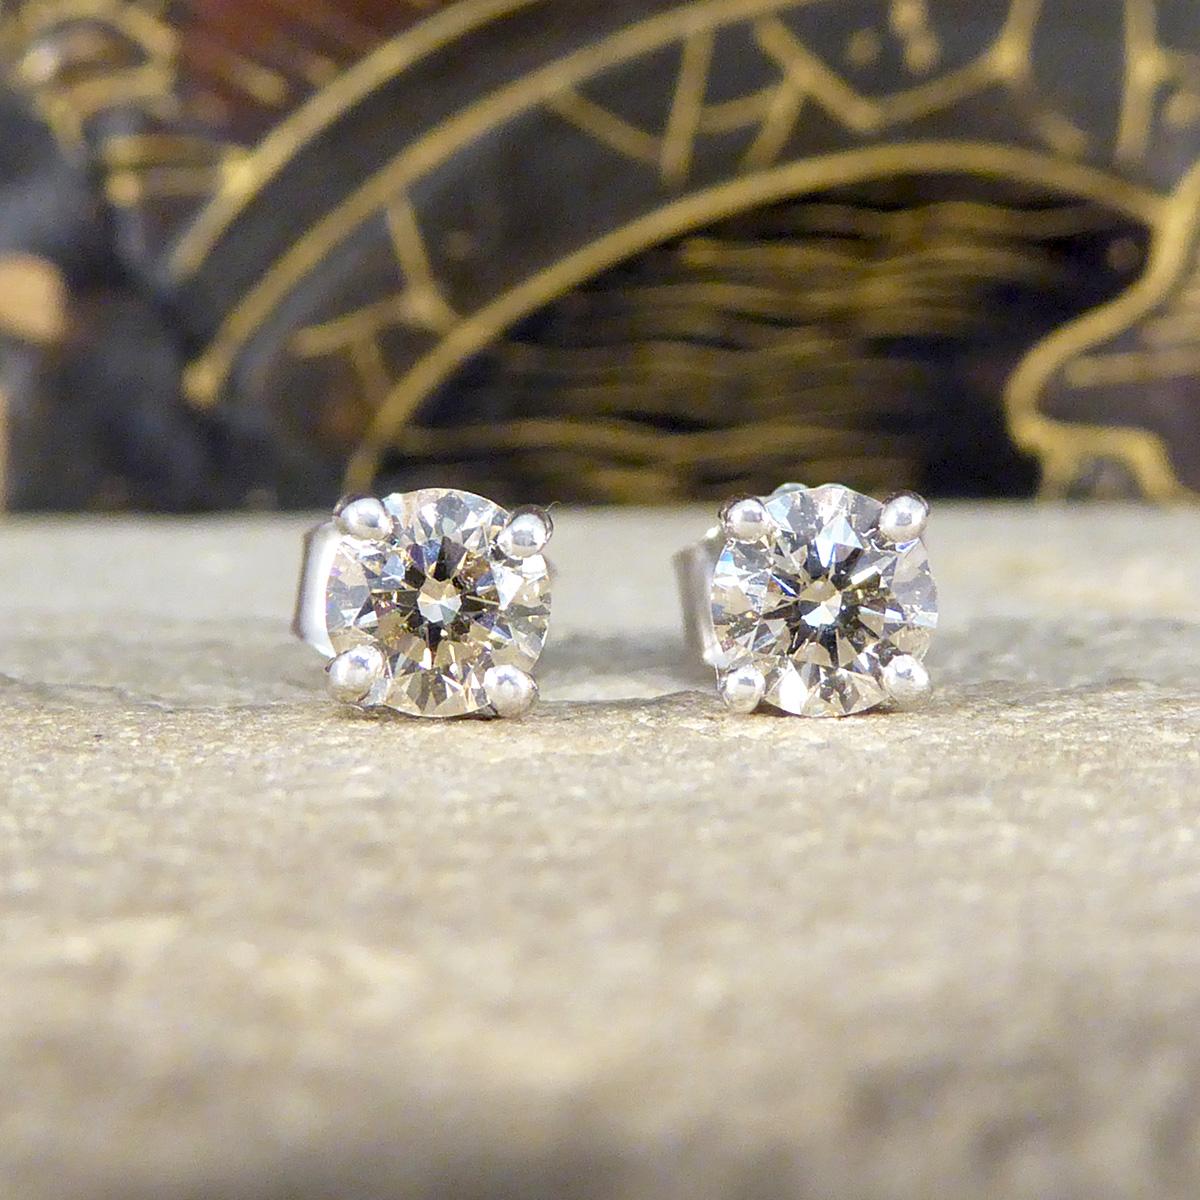 The perfect pair of stud earrings. Each stud is set with a Round Brilliant Cut Diamond, matching well in colour and clarity and weighing a total of 0.97ct. The Diamonds are very clear with with only one very slight inclusion on the outer of one